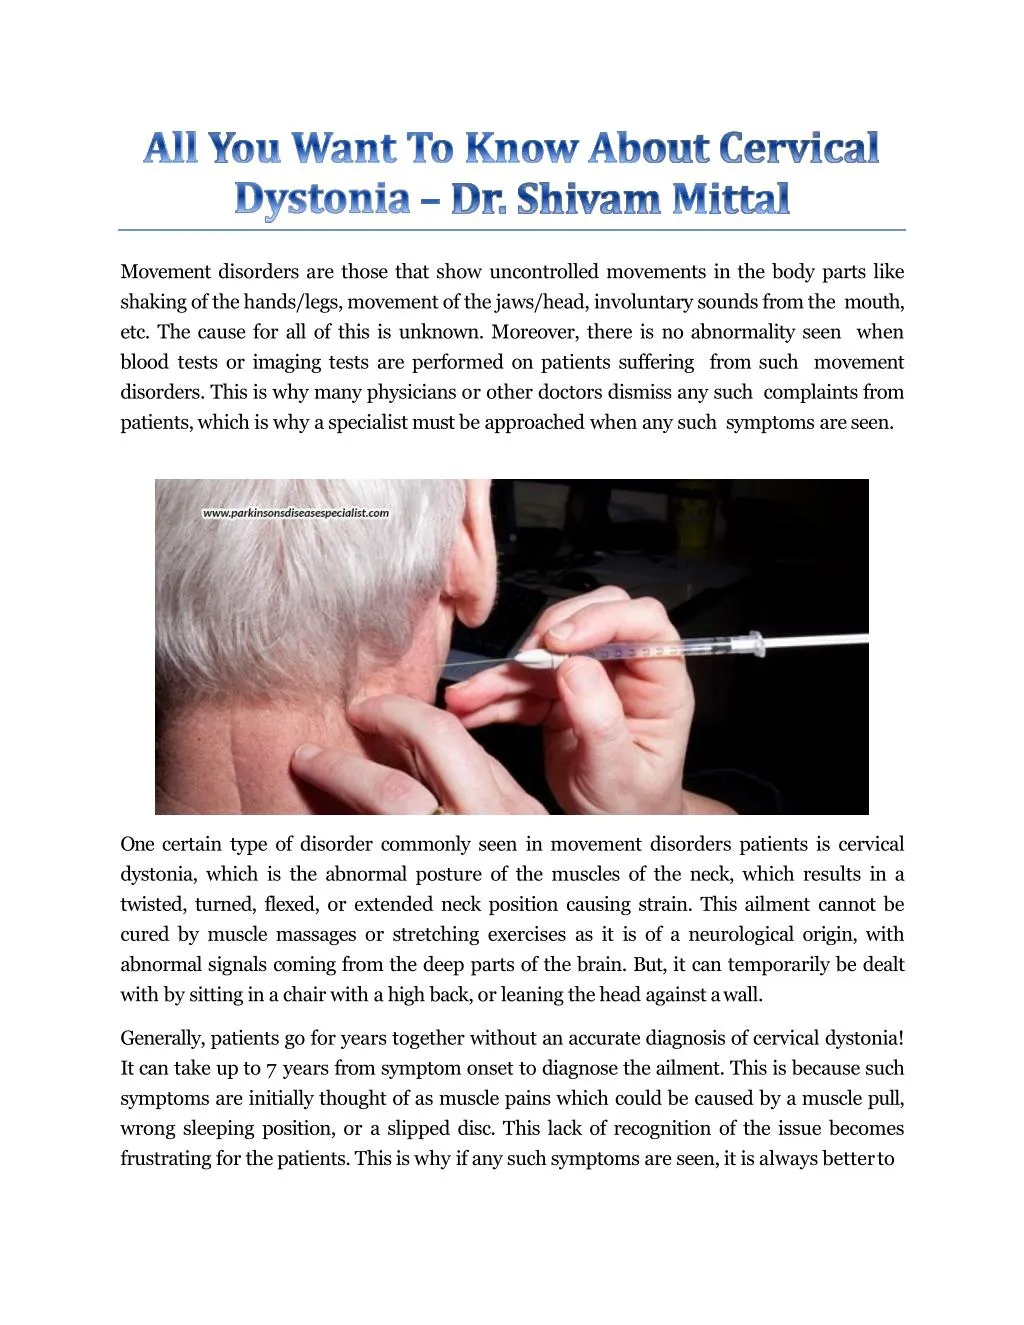 Ppt All You Want To Know About Cervical Dystonia Dr Shivam Mittal Powerpoint Presentation 2147